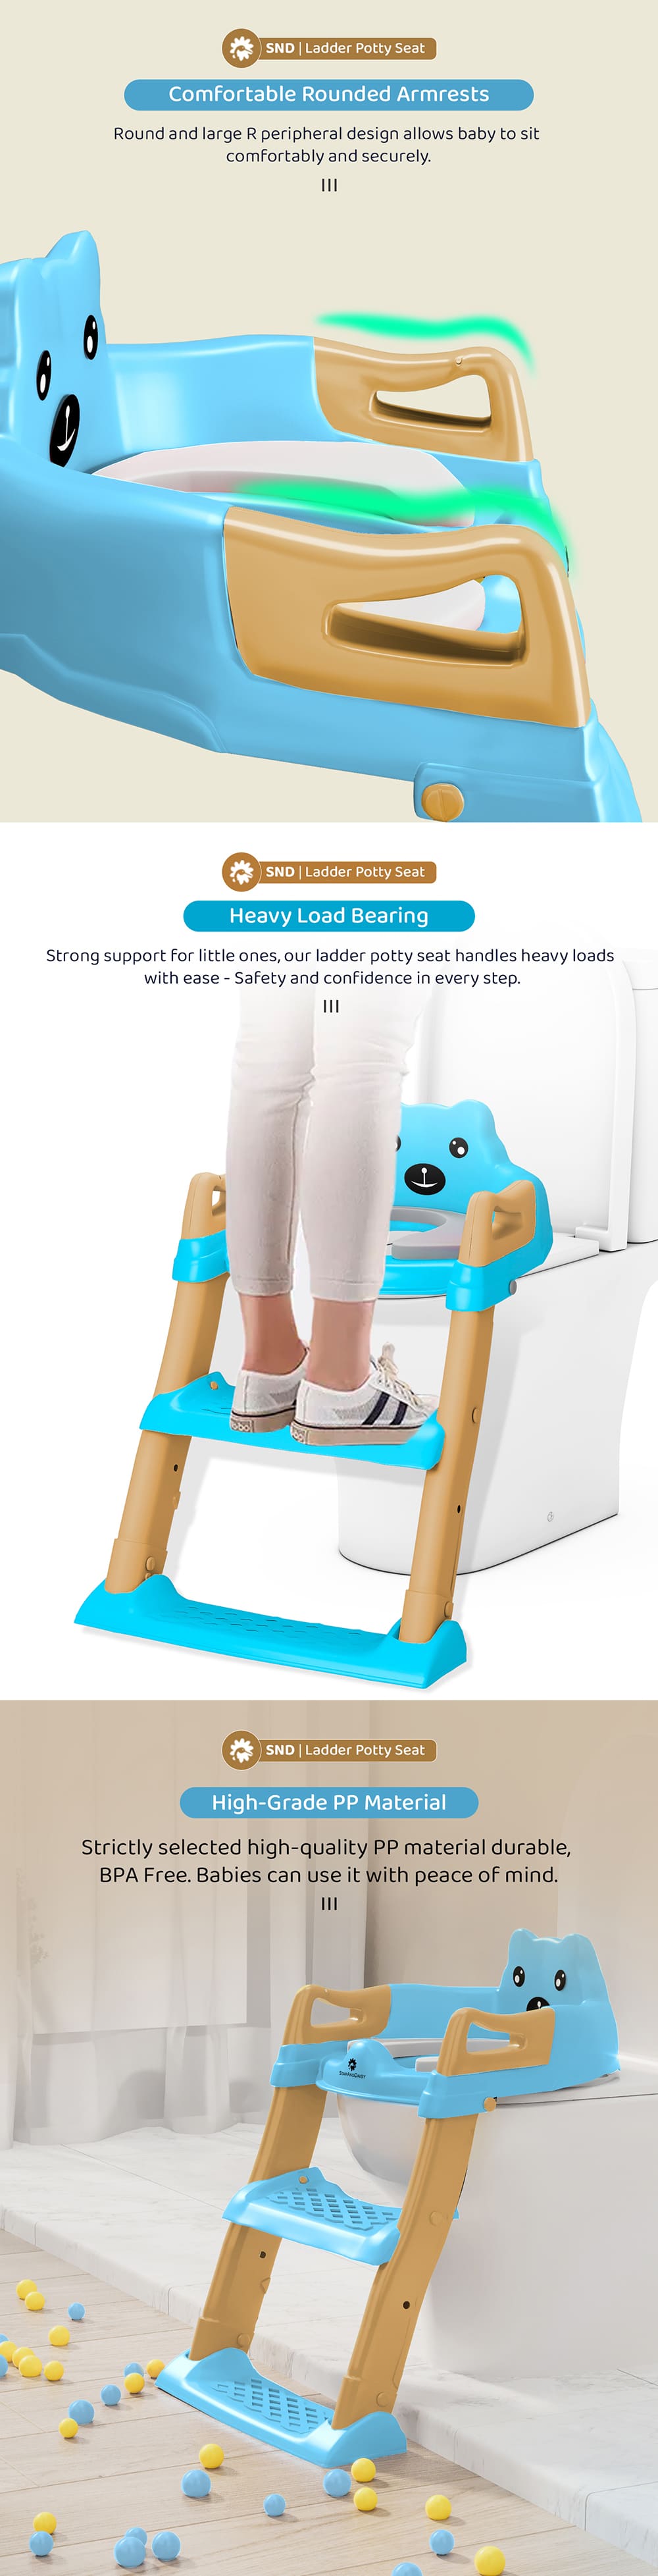 Ladder Potty seat with Rounded Armrests